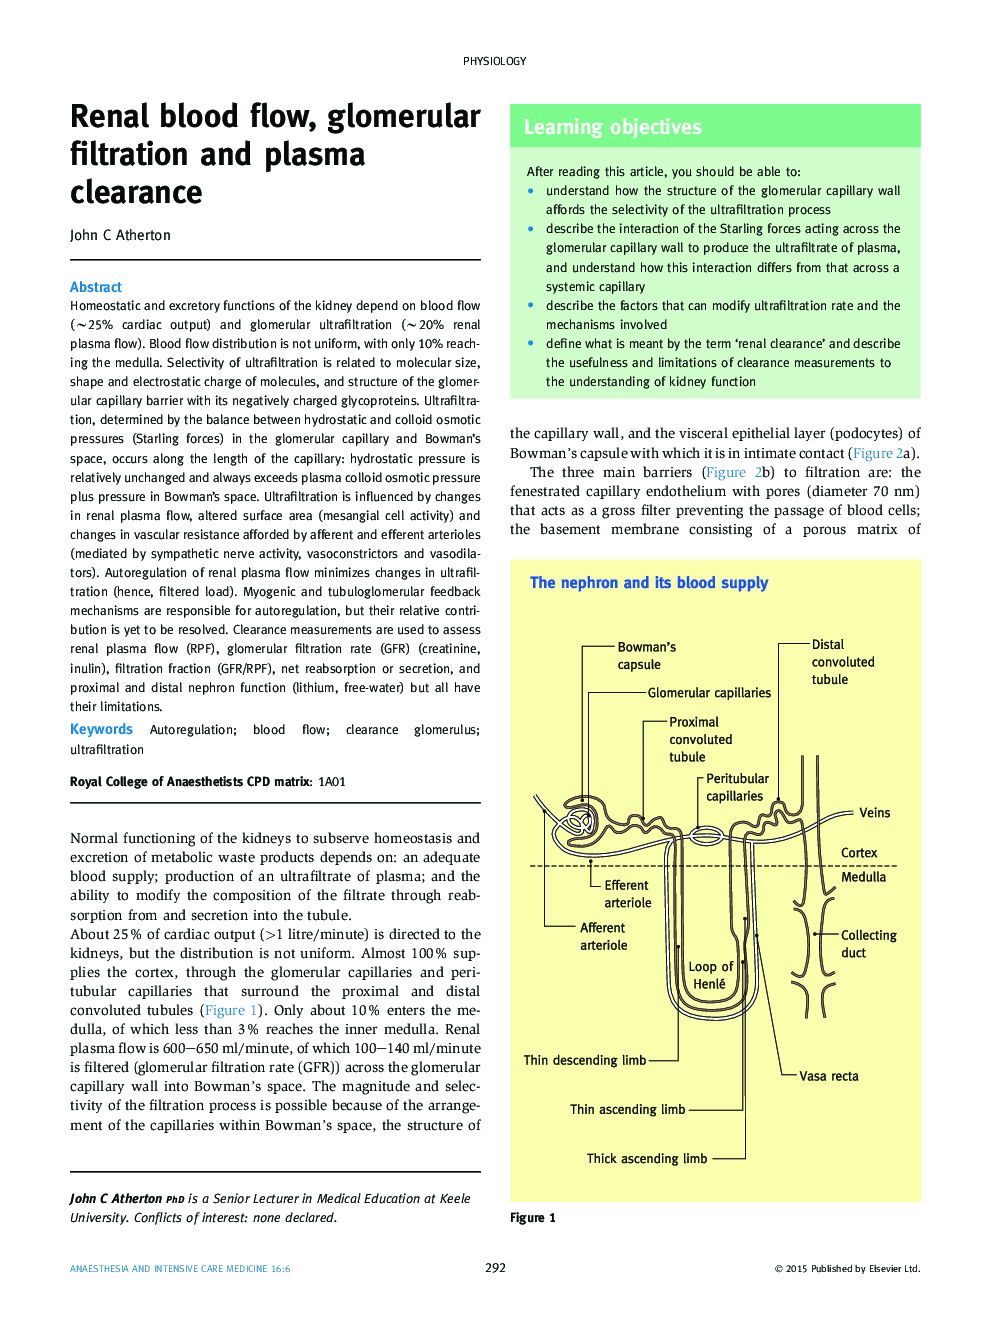 Renal blood flow, glomerular filtration and plasma clearance